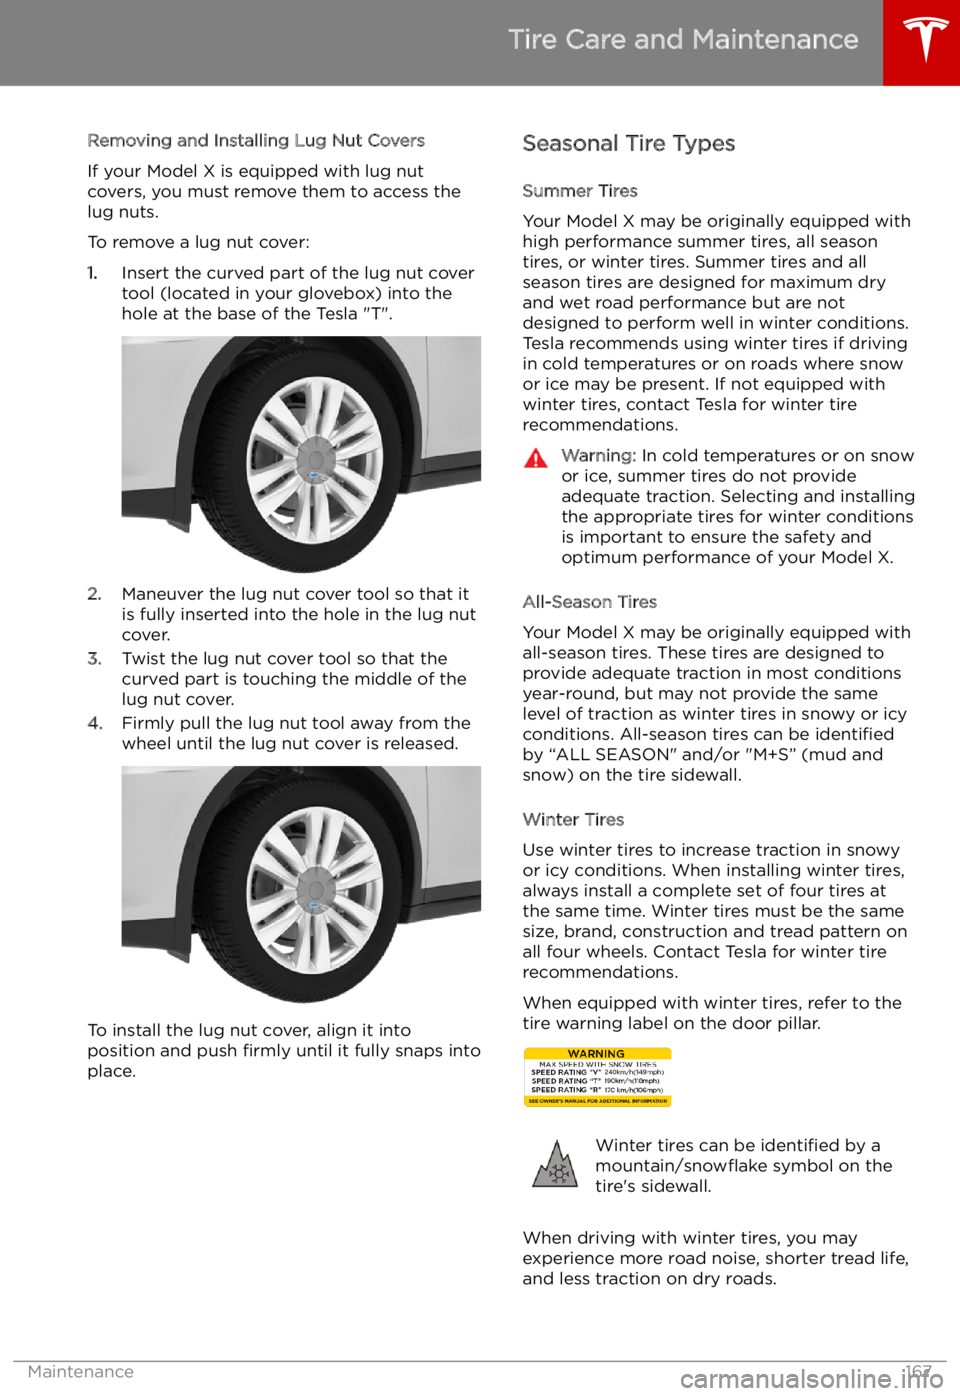 TESLA MODEL X 2021  Owner´s Manual Removing and Installing Lug Nut Covers
If your Model X is equipped with lug nut
covers, you must remove them to access the
lug nuts.
To remove a lug nut cover:
1. Insert the curved part of the lug nut